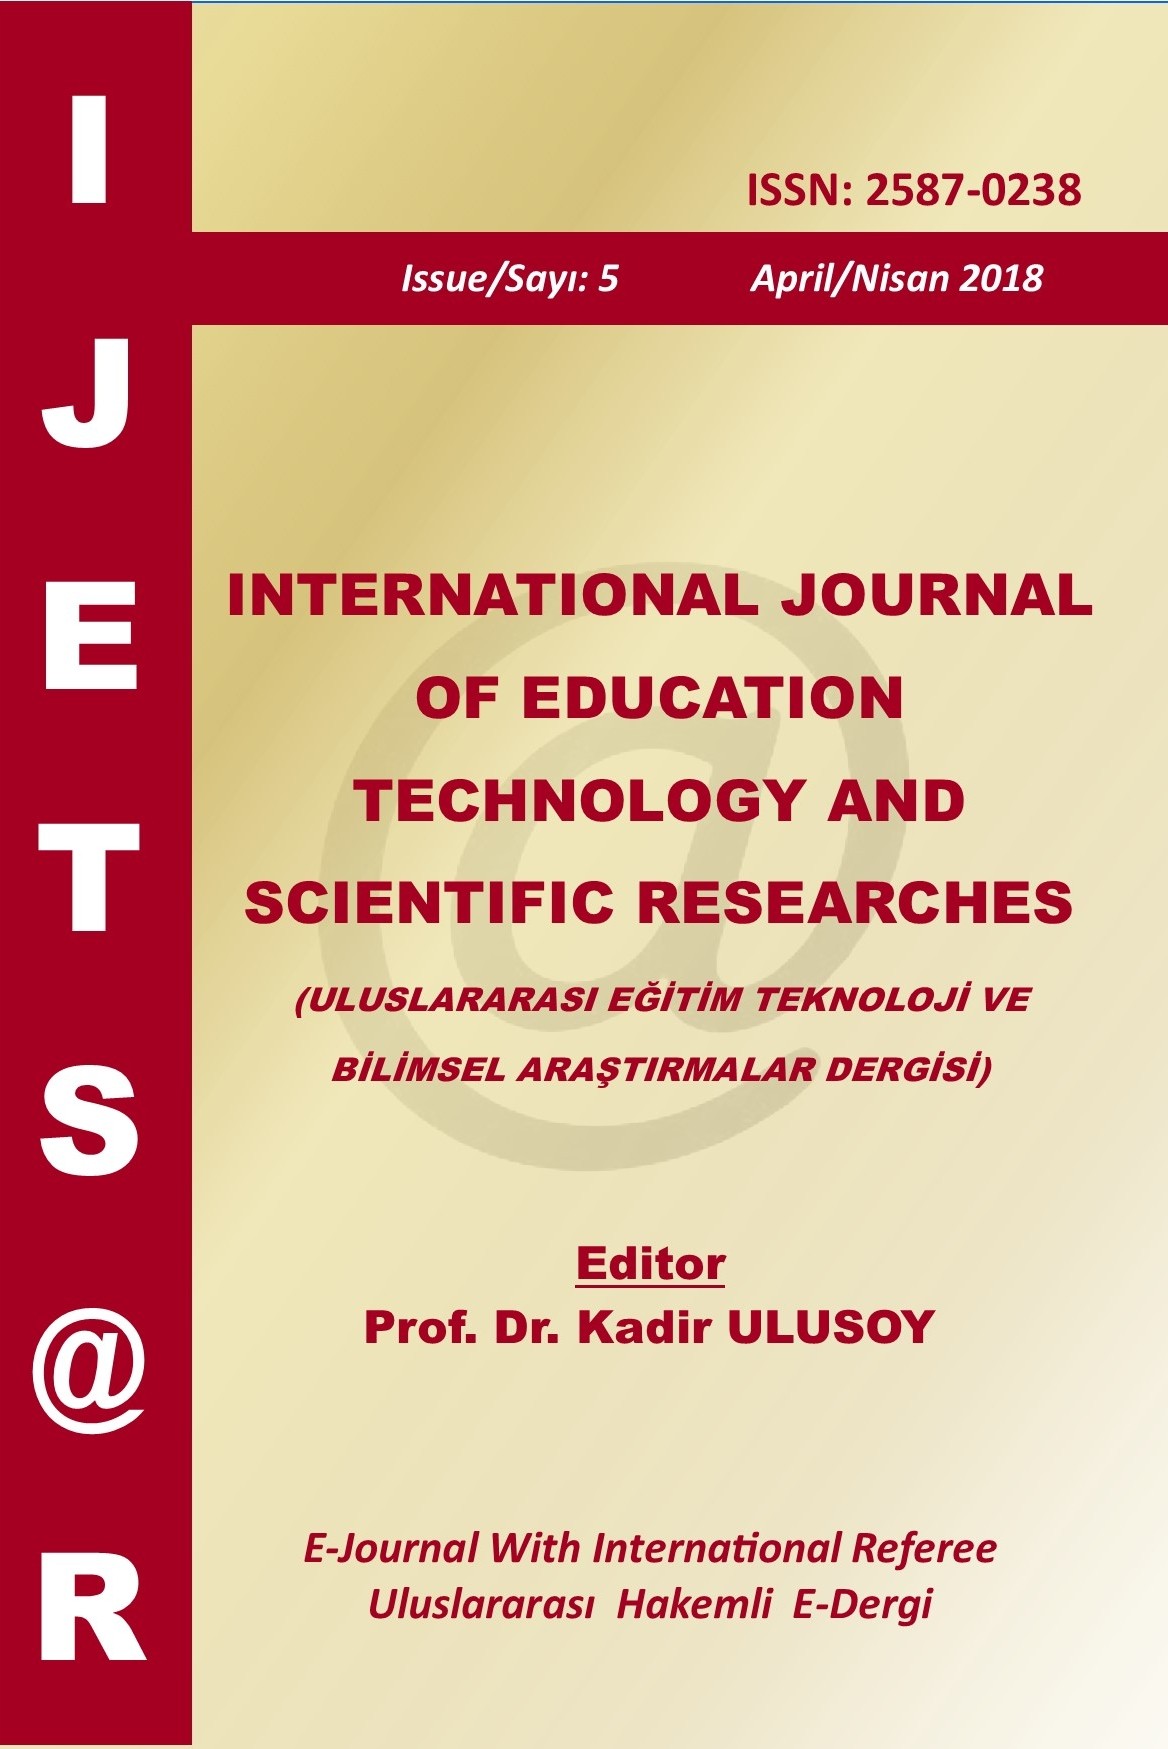 International Journal of Education Technology and Scientific Researches